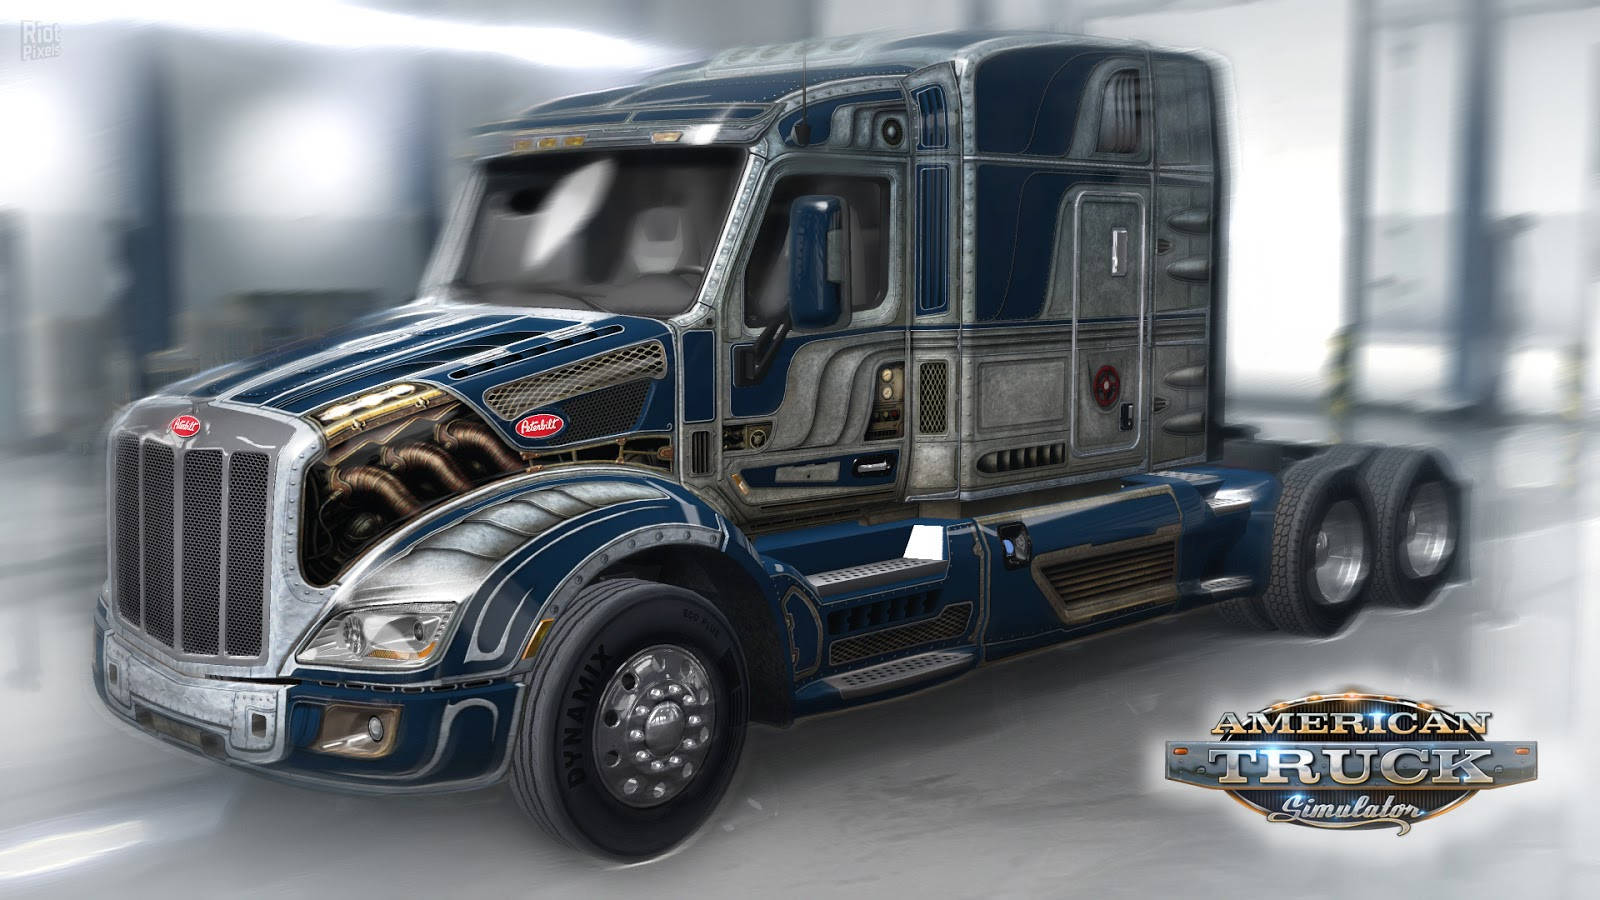 Captivating Journey In American Truck Simulator Background